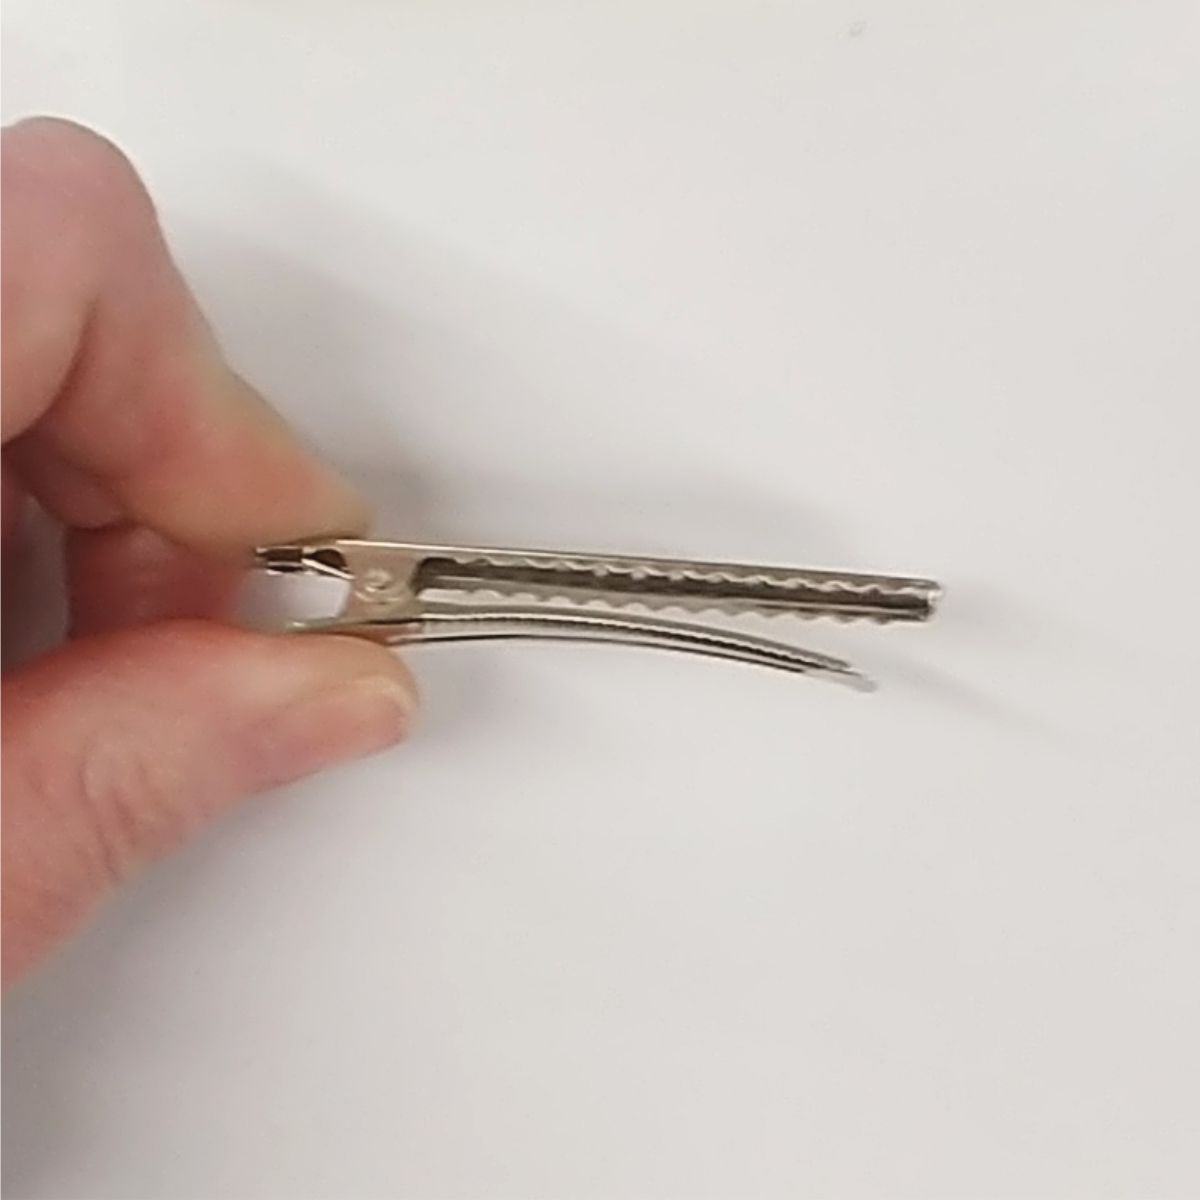 Large 5.5 cm Silver Flat Metal Single Prong Alligator Hair Clips - CraftCutterSupply.com